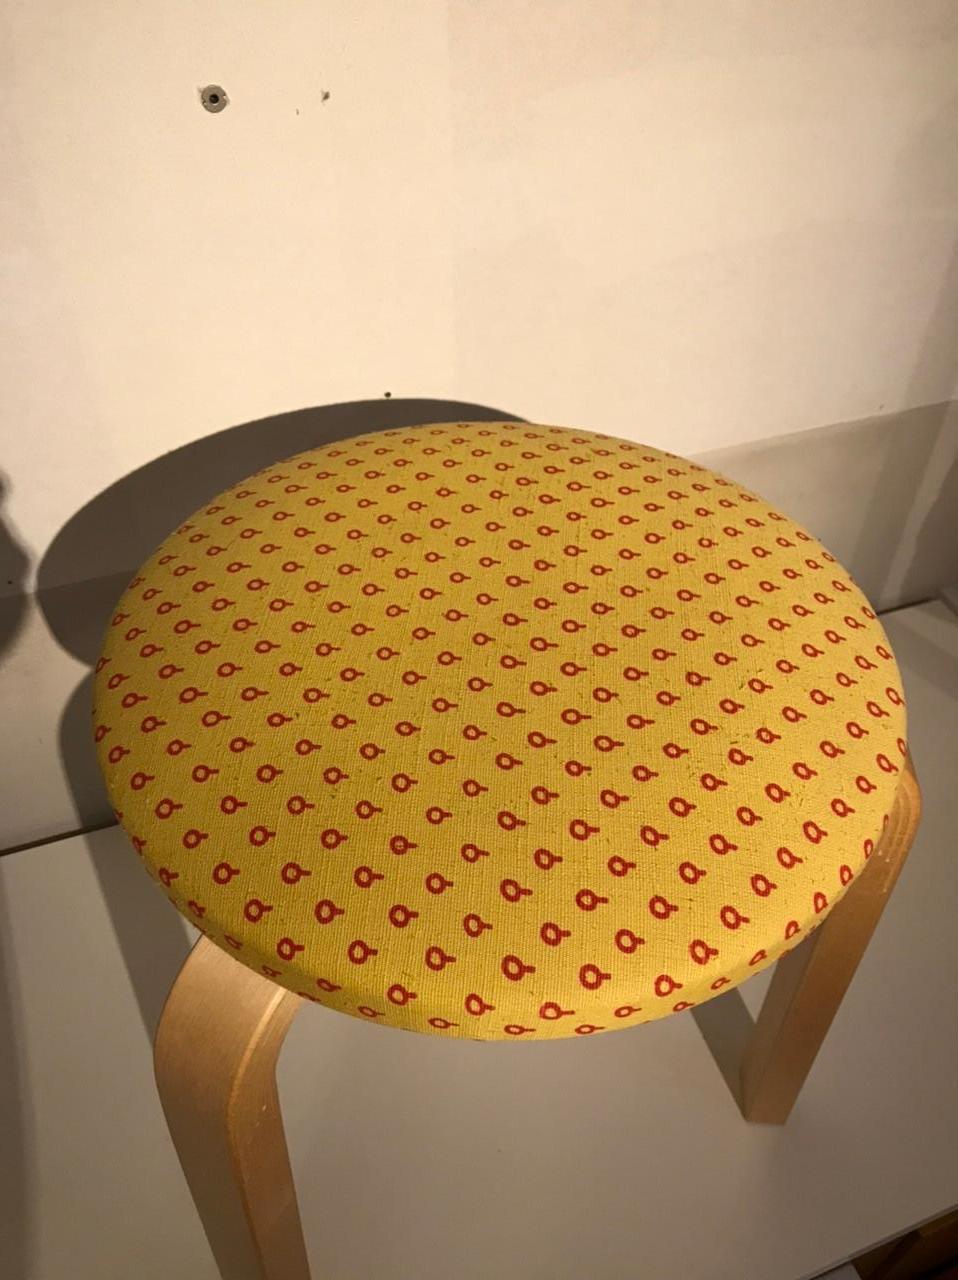 This stool is 4 years old.
The seat has been upholstered with old stock fabric designed by Alexander Girard.